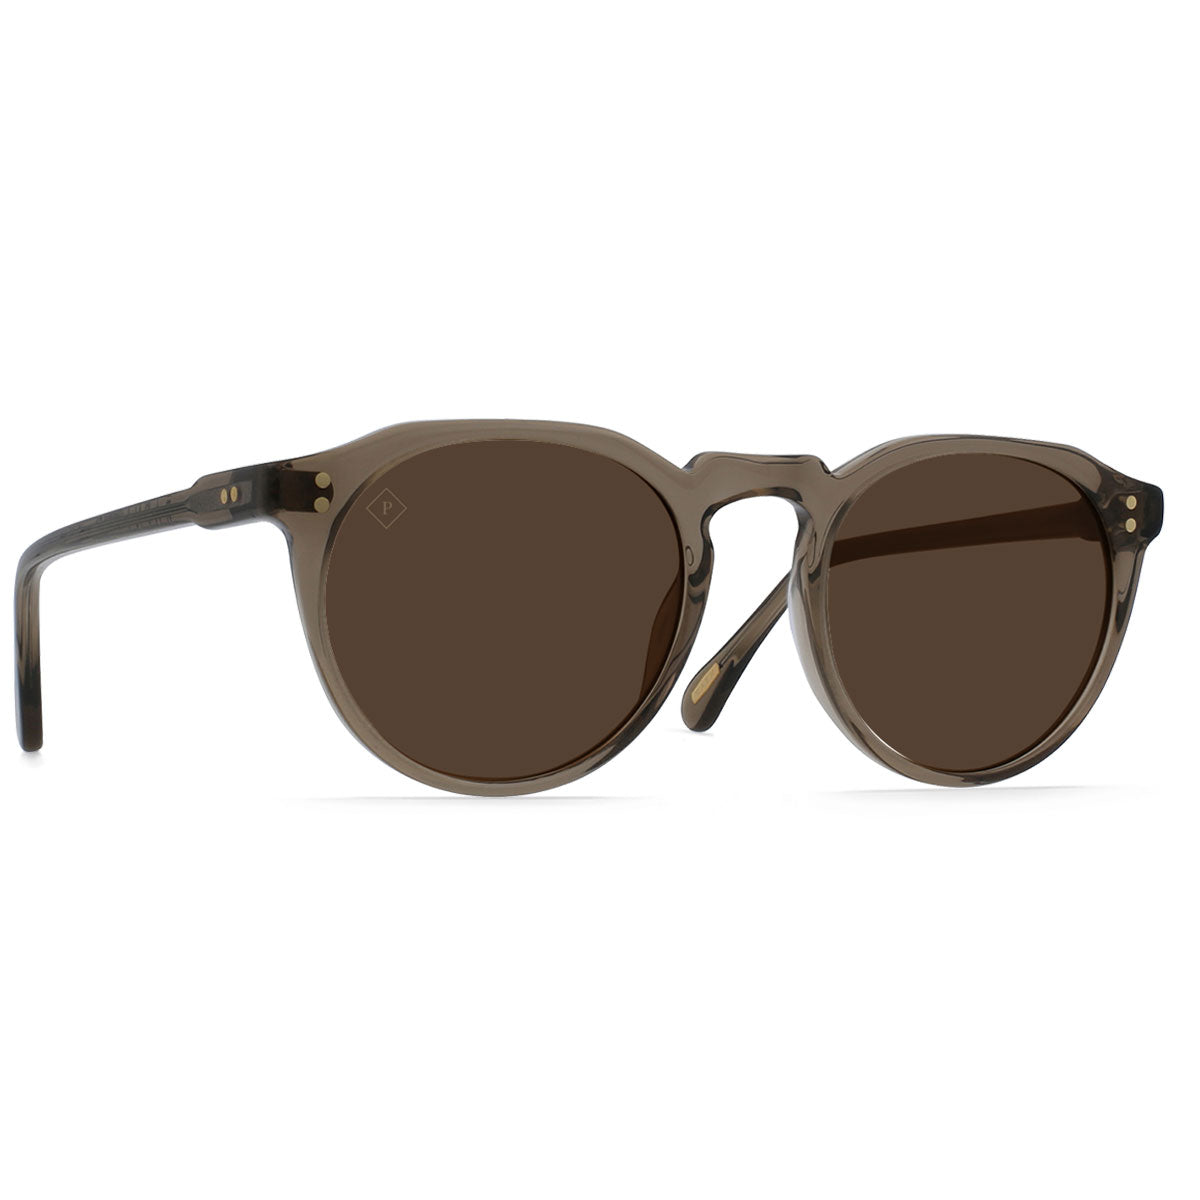 Raen Remmy 52 Sunglasses - Ghost/Vibrant Brown Polarized image 1